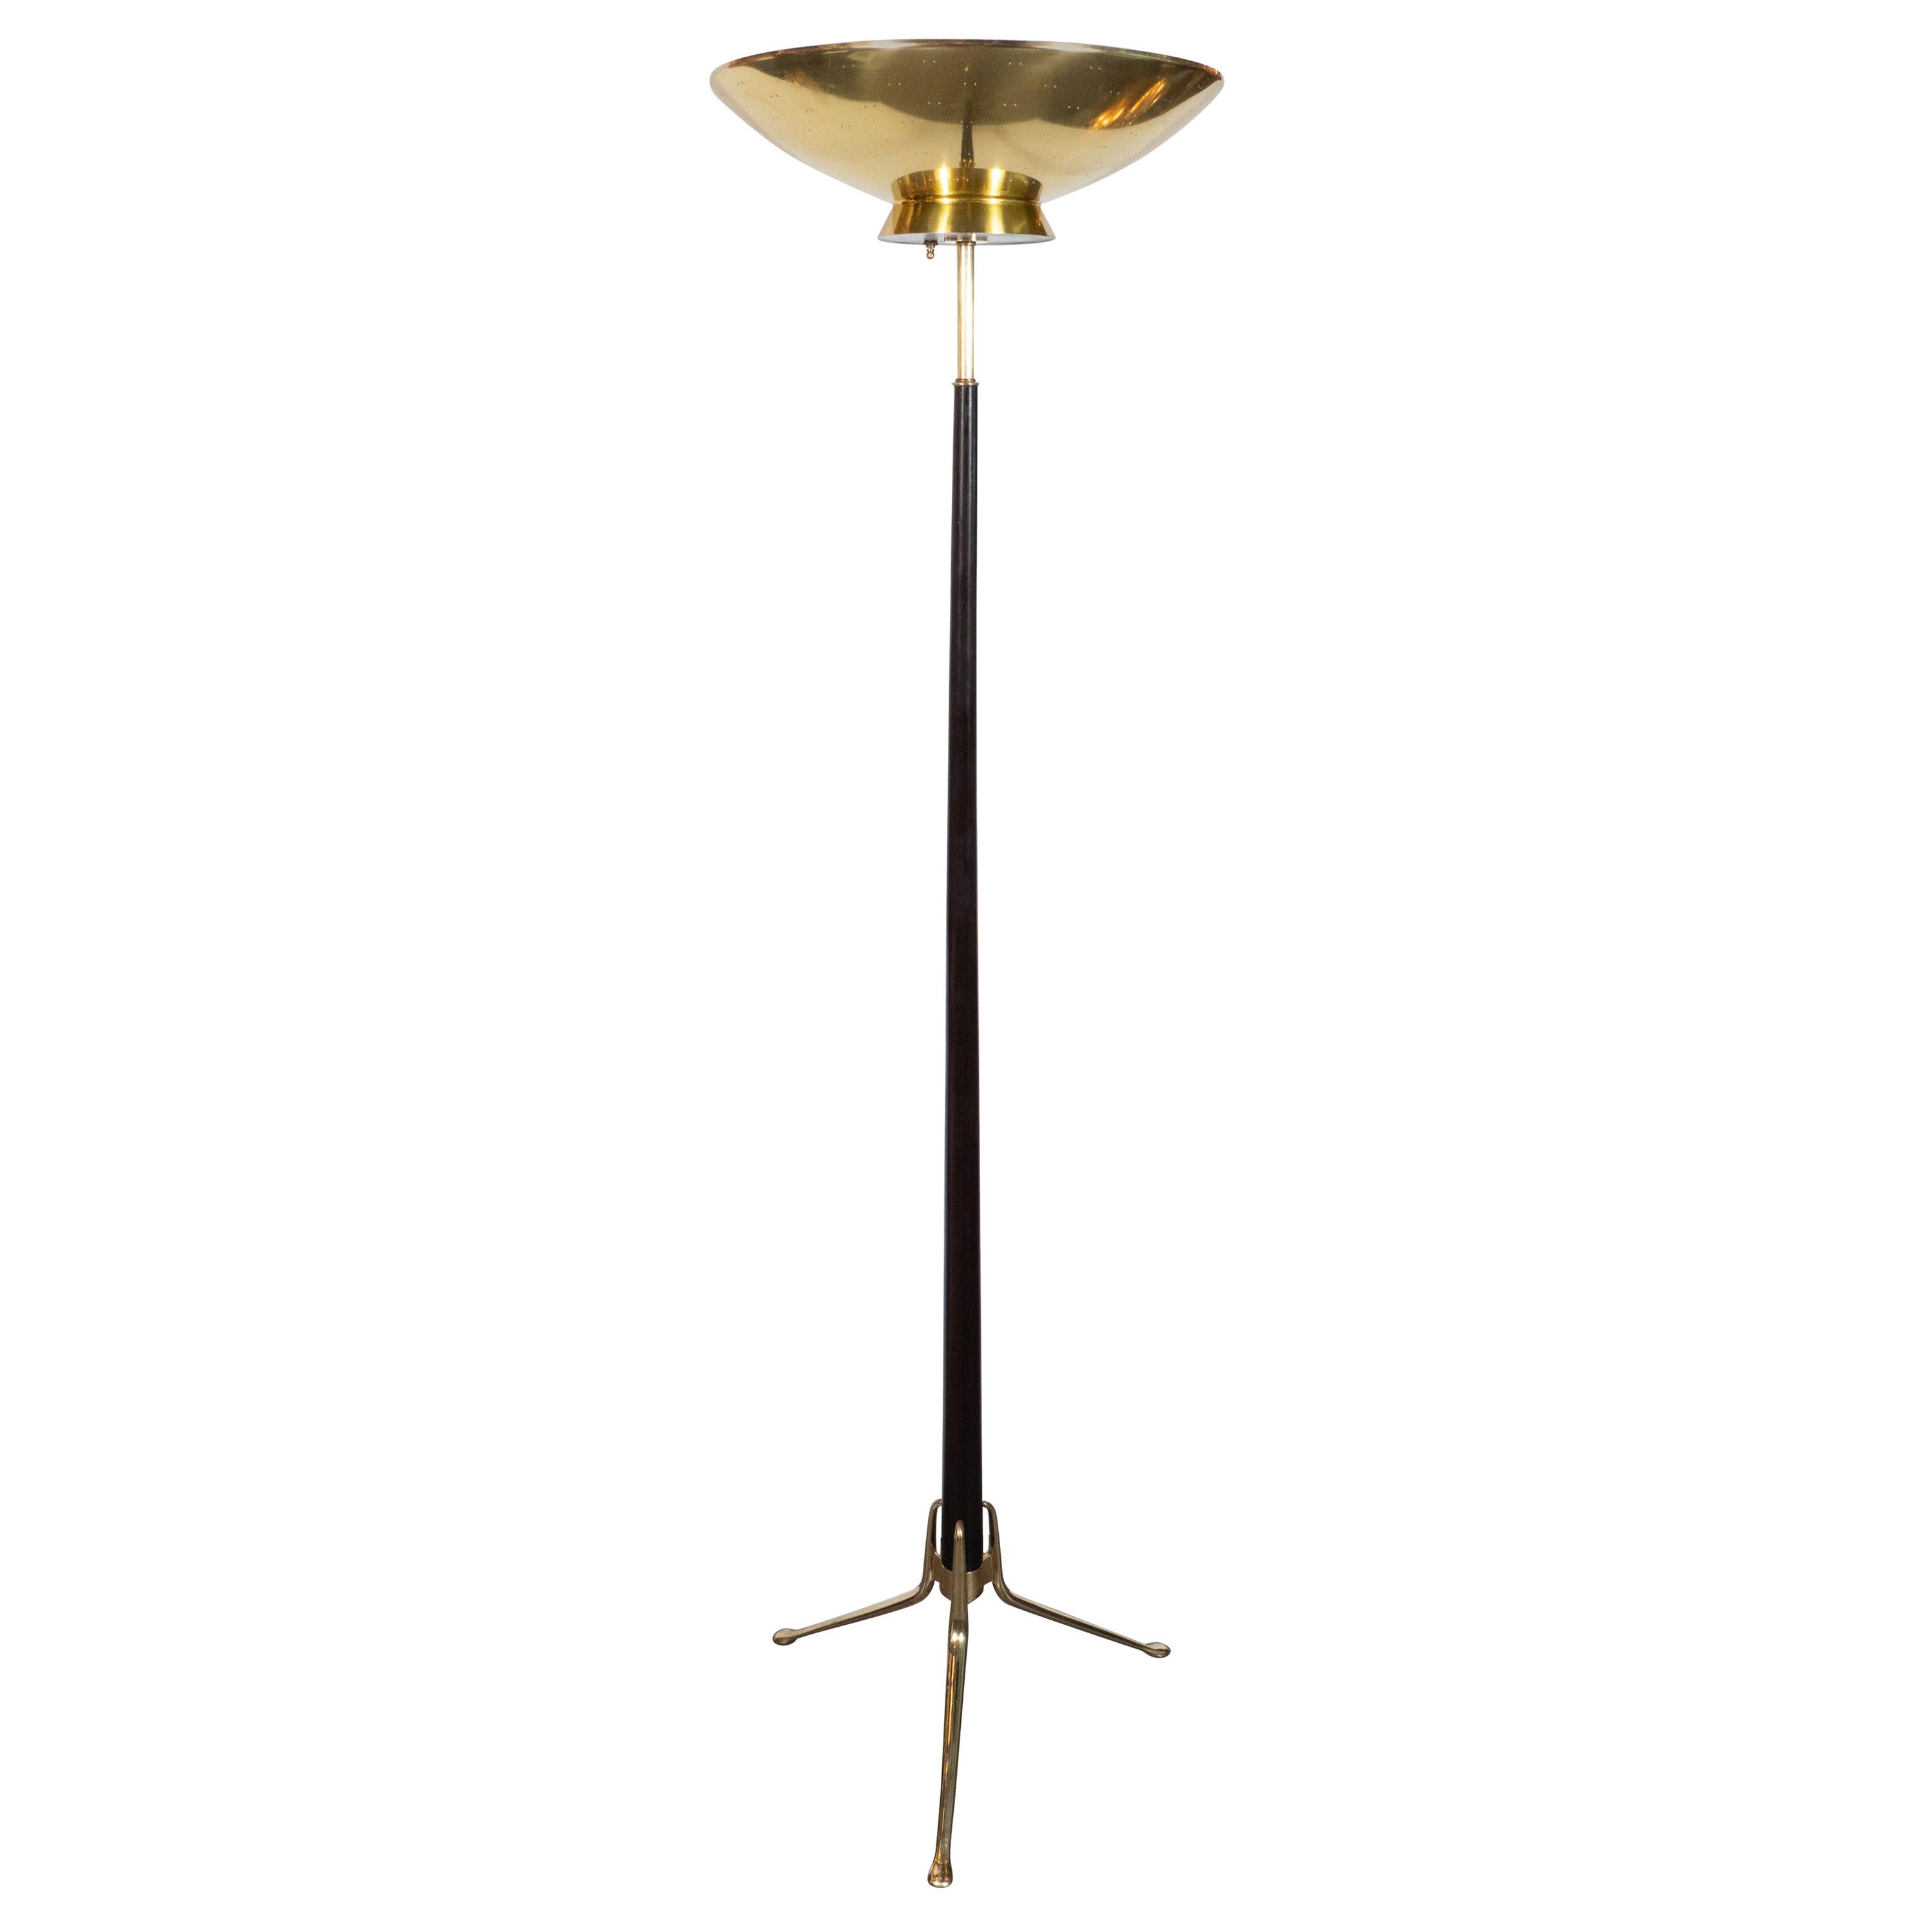 Mid-Century Modern Floor Lamp in Brass and Ebonized Walnut by Gerald Thurston For Sale